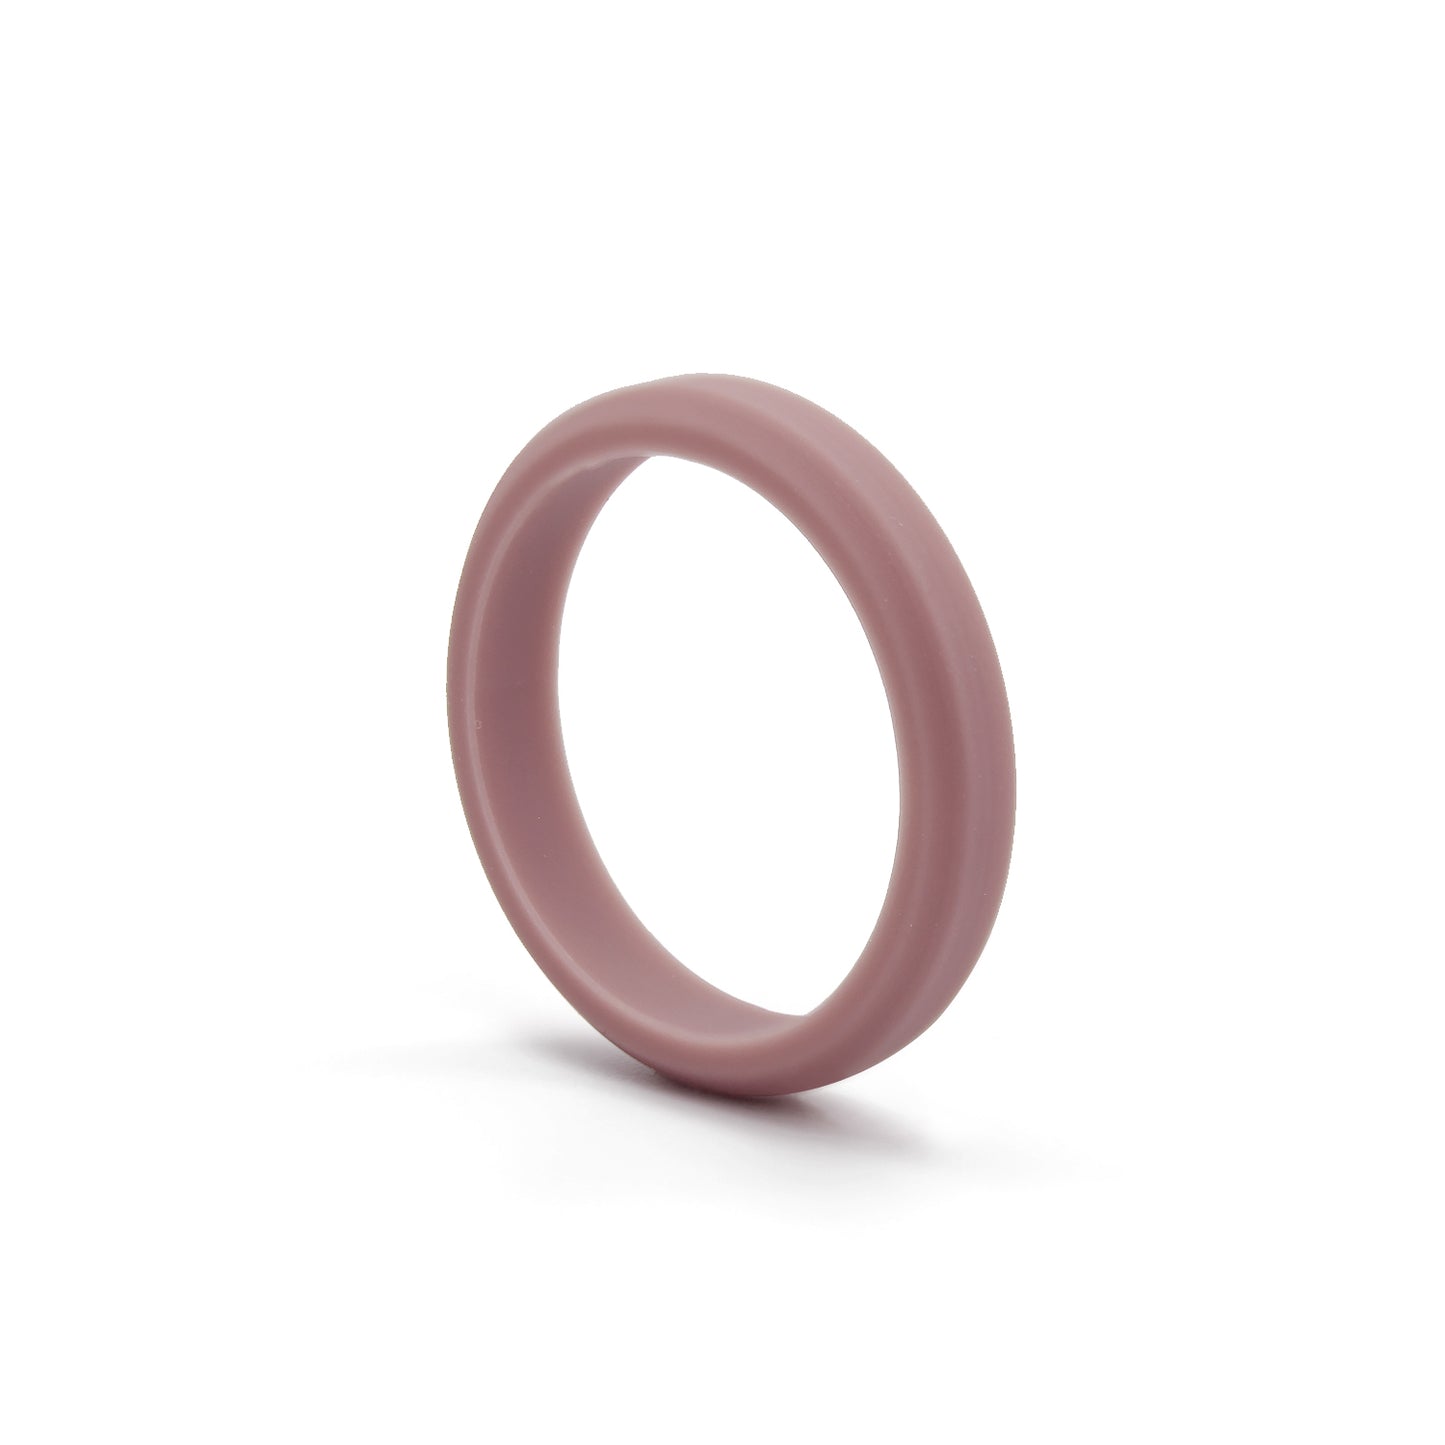 Rose Pink Bevel Silicone Rubber Rings For Women